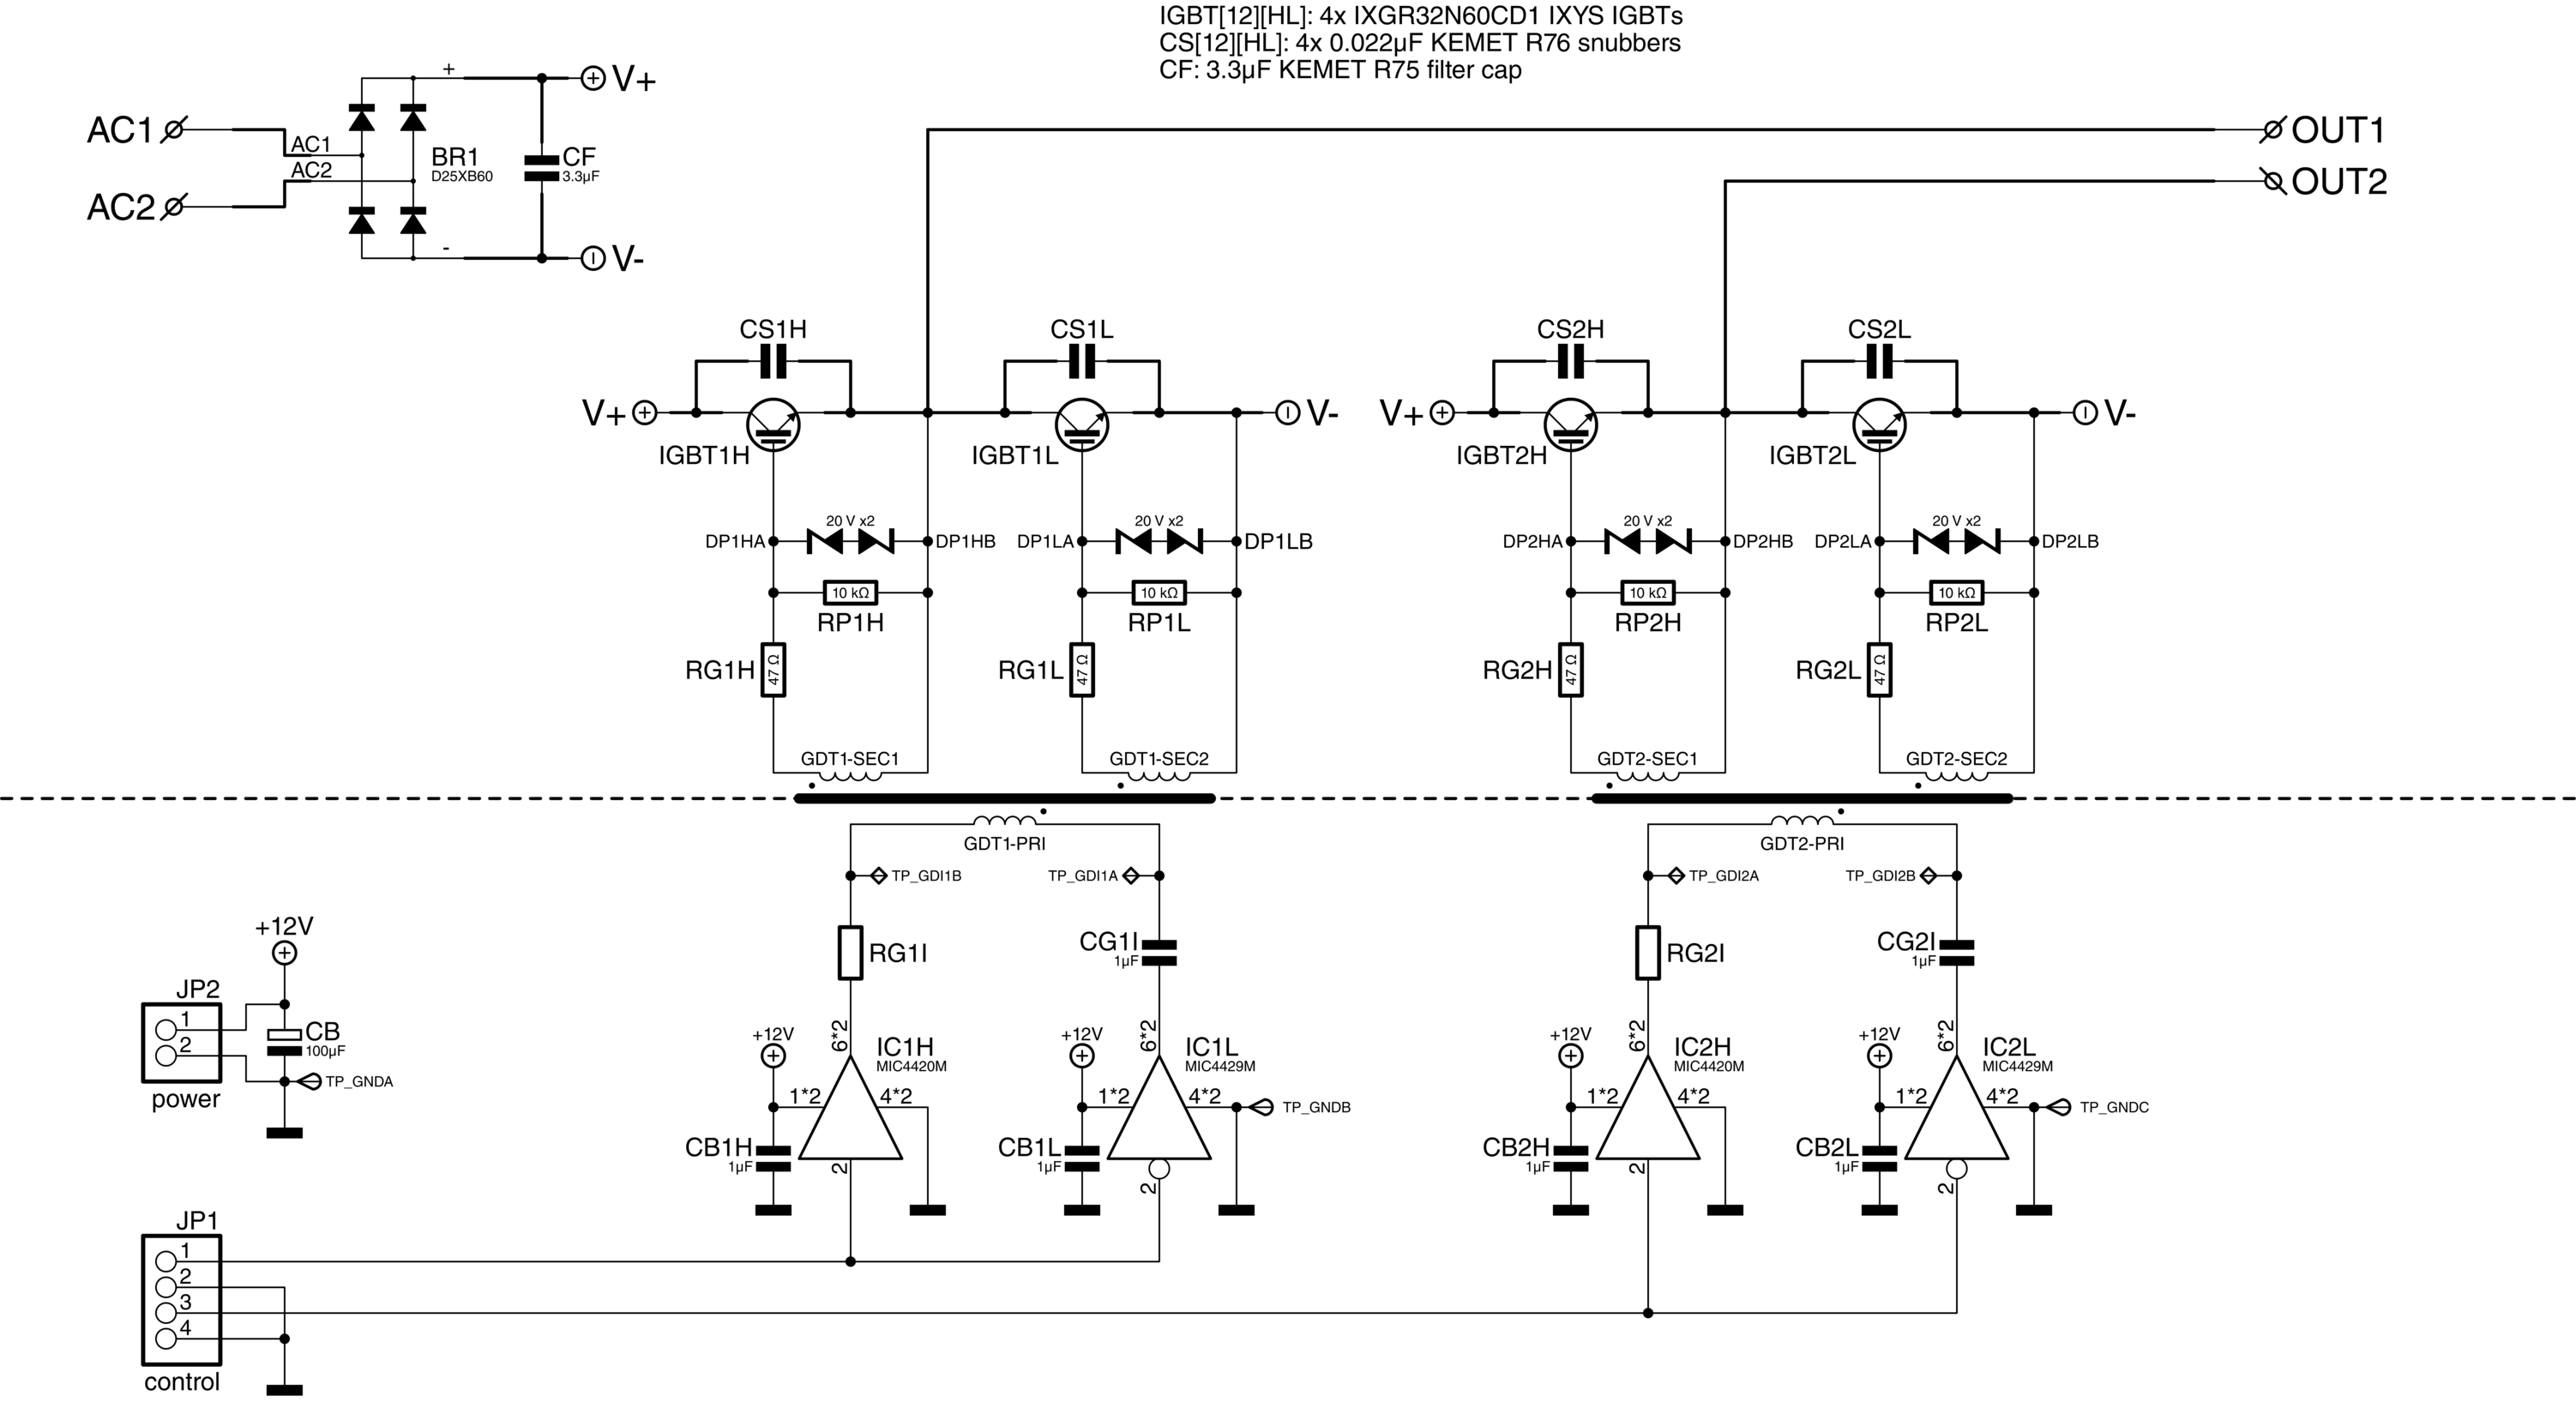 Induction heater power stage schematic.png